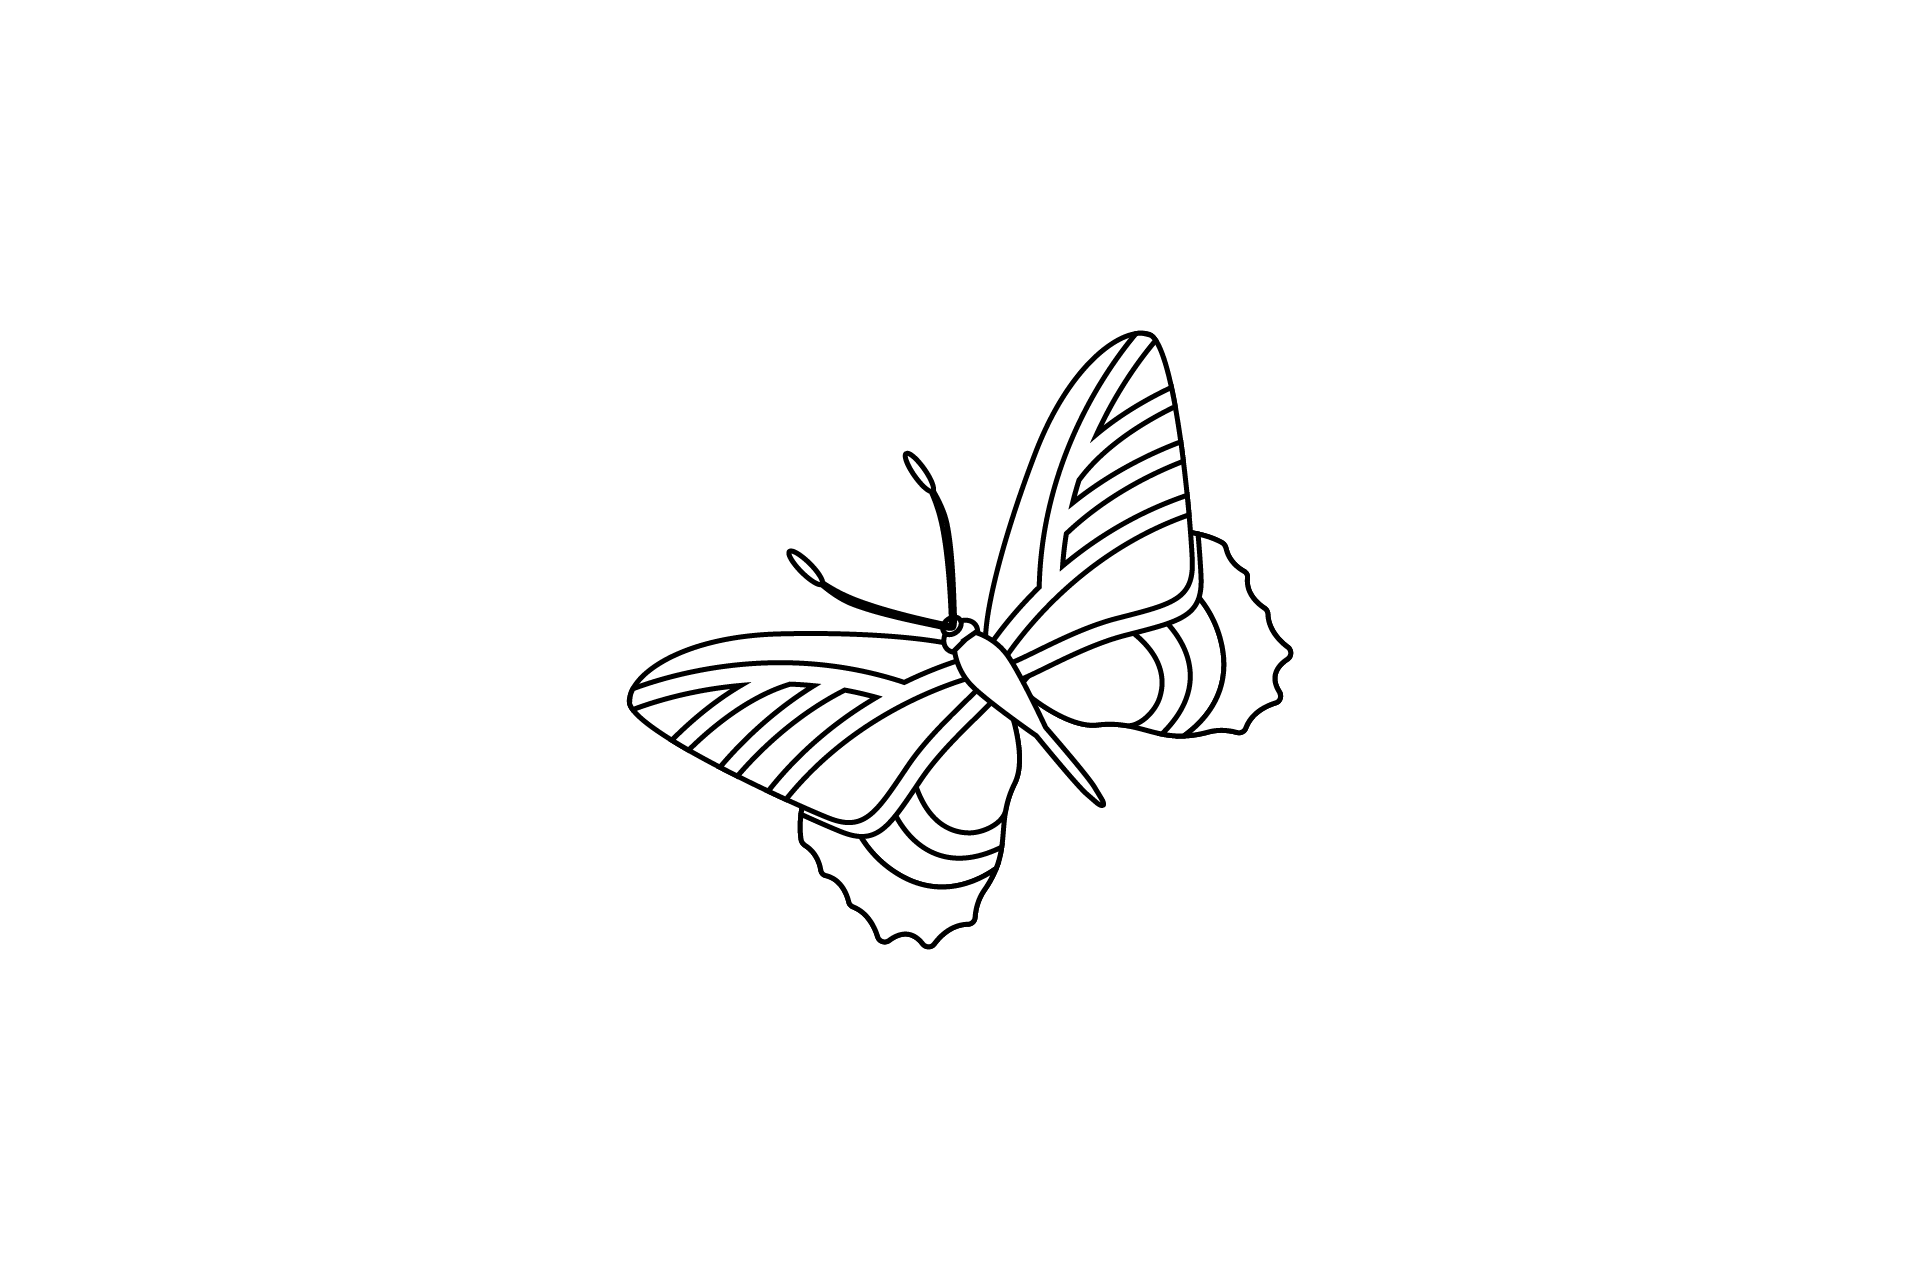 Butterfly Layout Pattern Outline Graphic by flatbackgroundstudio ...